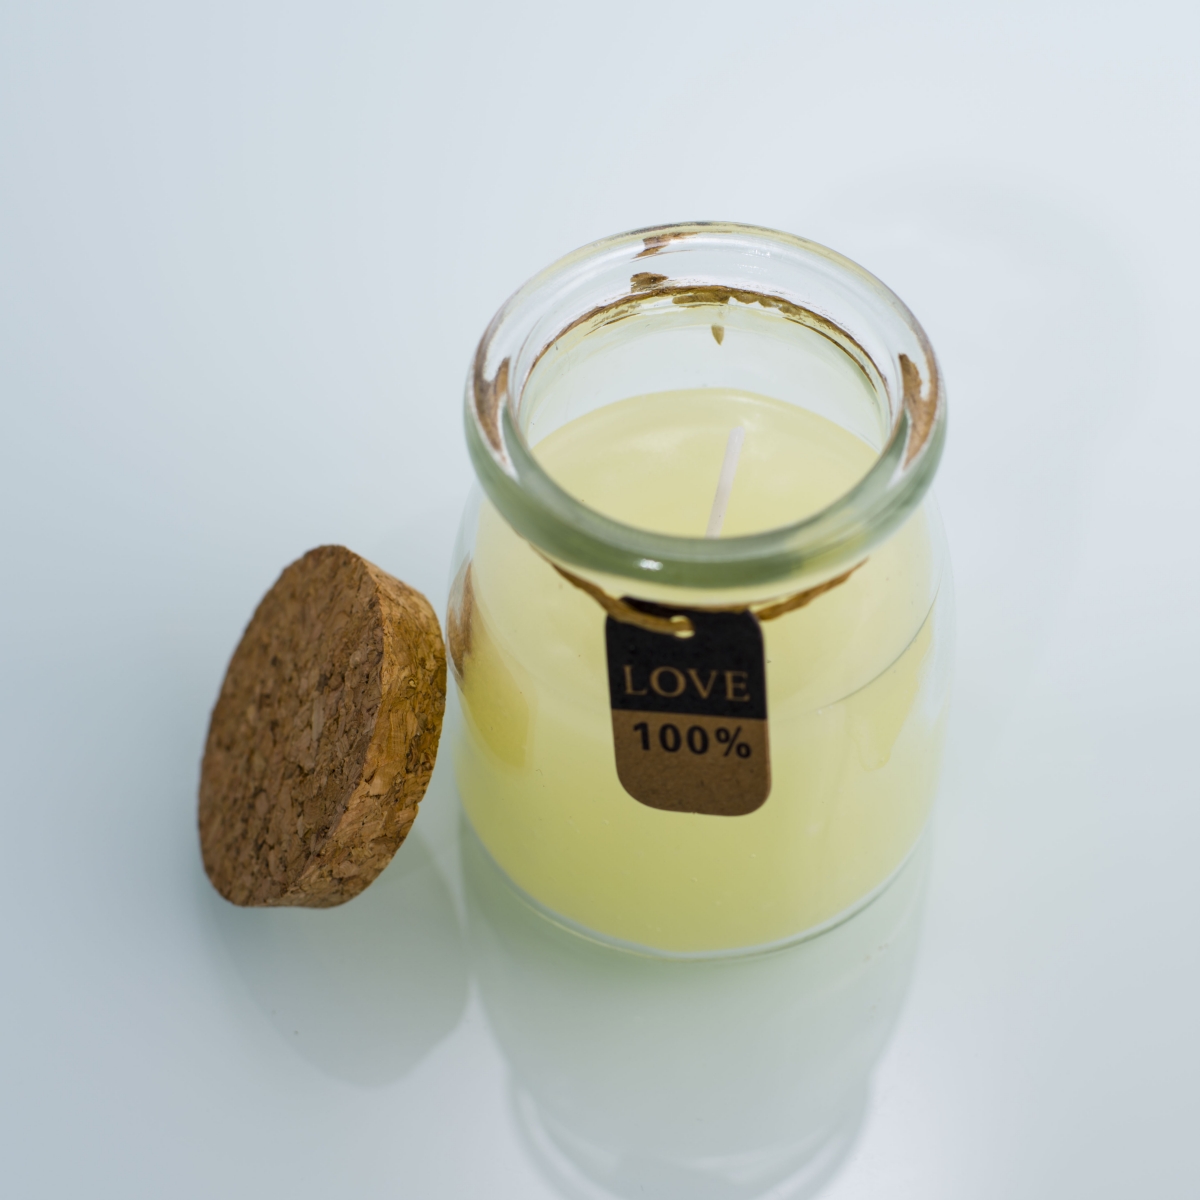 Scented Candles In Glass Jar -Pudding Glass Jar ,Jasmine & Lily ,China Factory ,Wholesale Price-HOWCANDLE-Candles,Scented Candles,Aromatherapy Candles,Soy Candles,Vegan Candles,Jar Candles,Pillar Candles,Candle Gift Sets,Essential Oils,Reed Diffuser,Candle Holder,